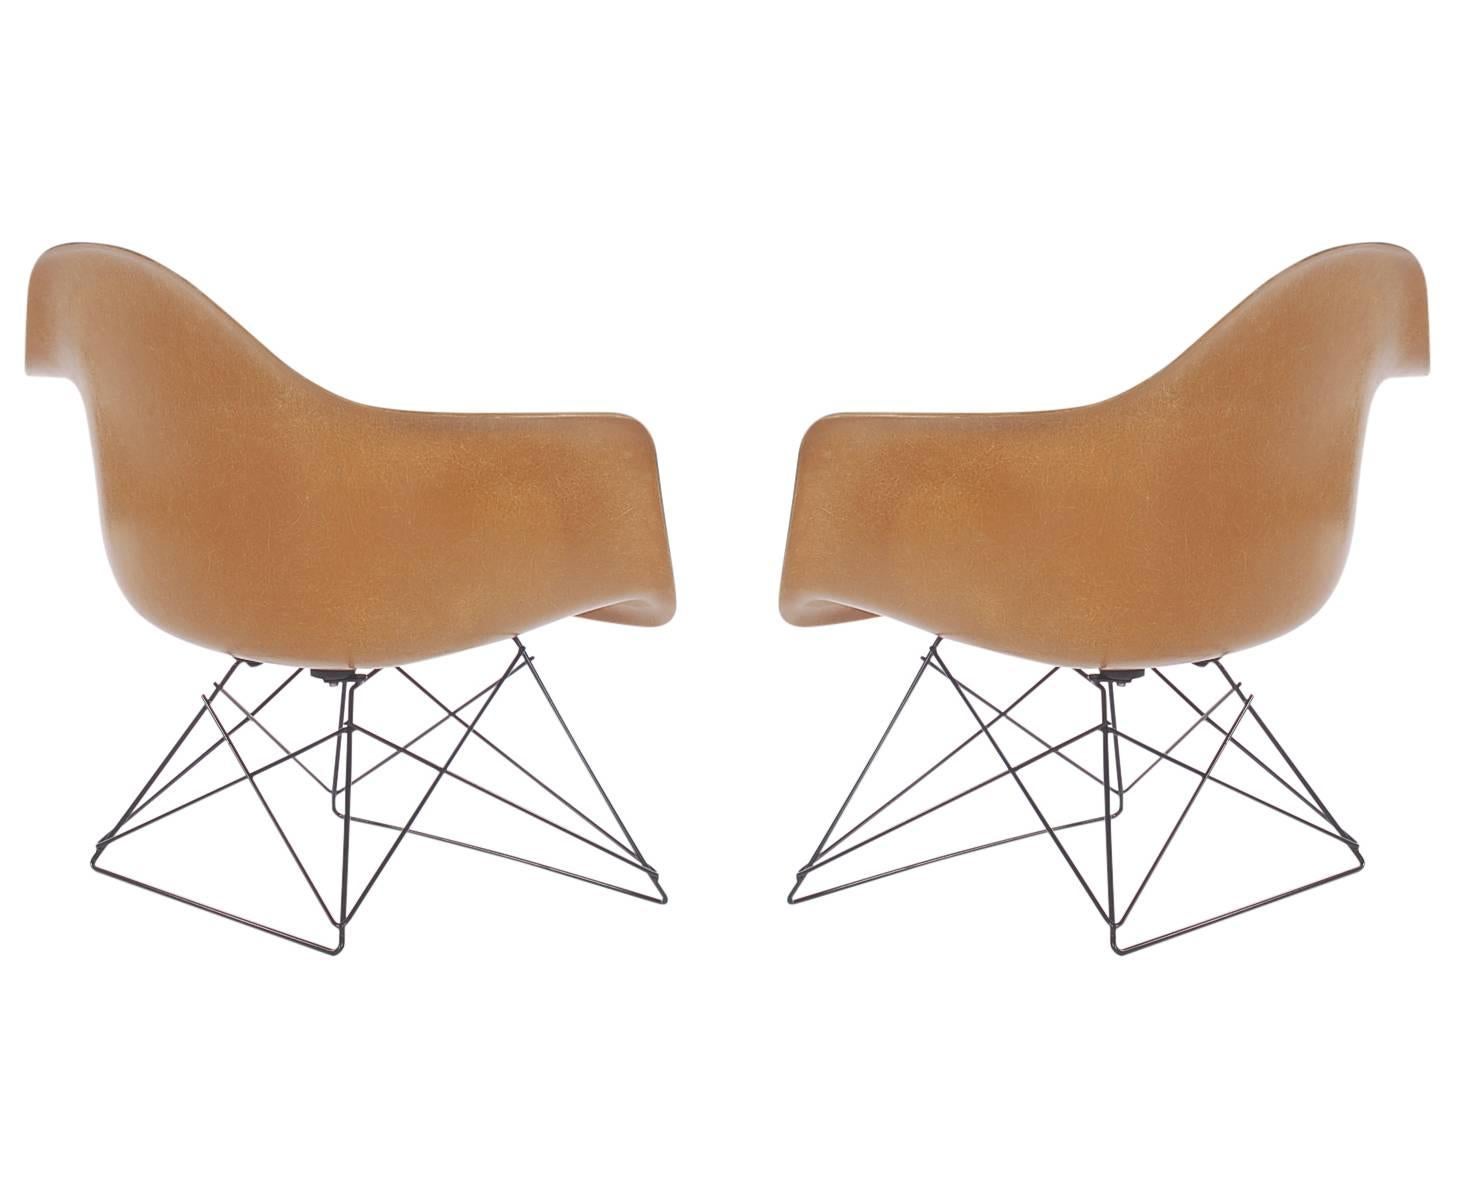 American Mid-Century Modern Eames for Herman Miller 'LAR' Lounge Chairs